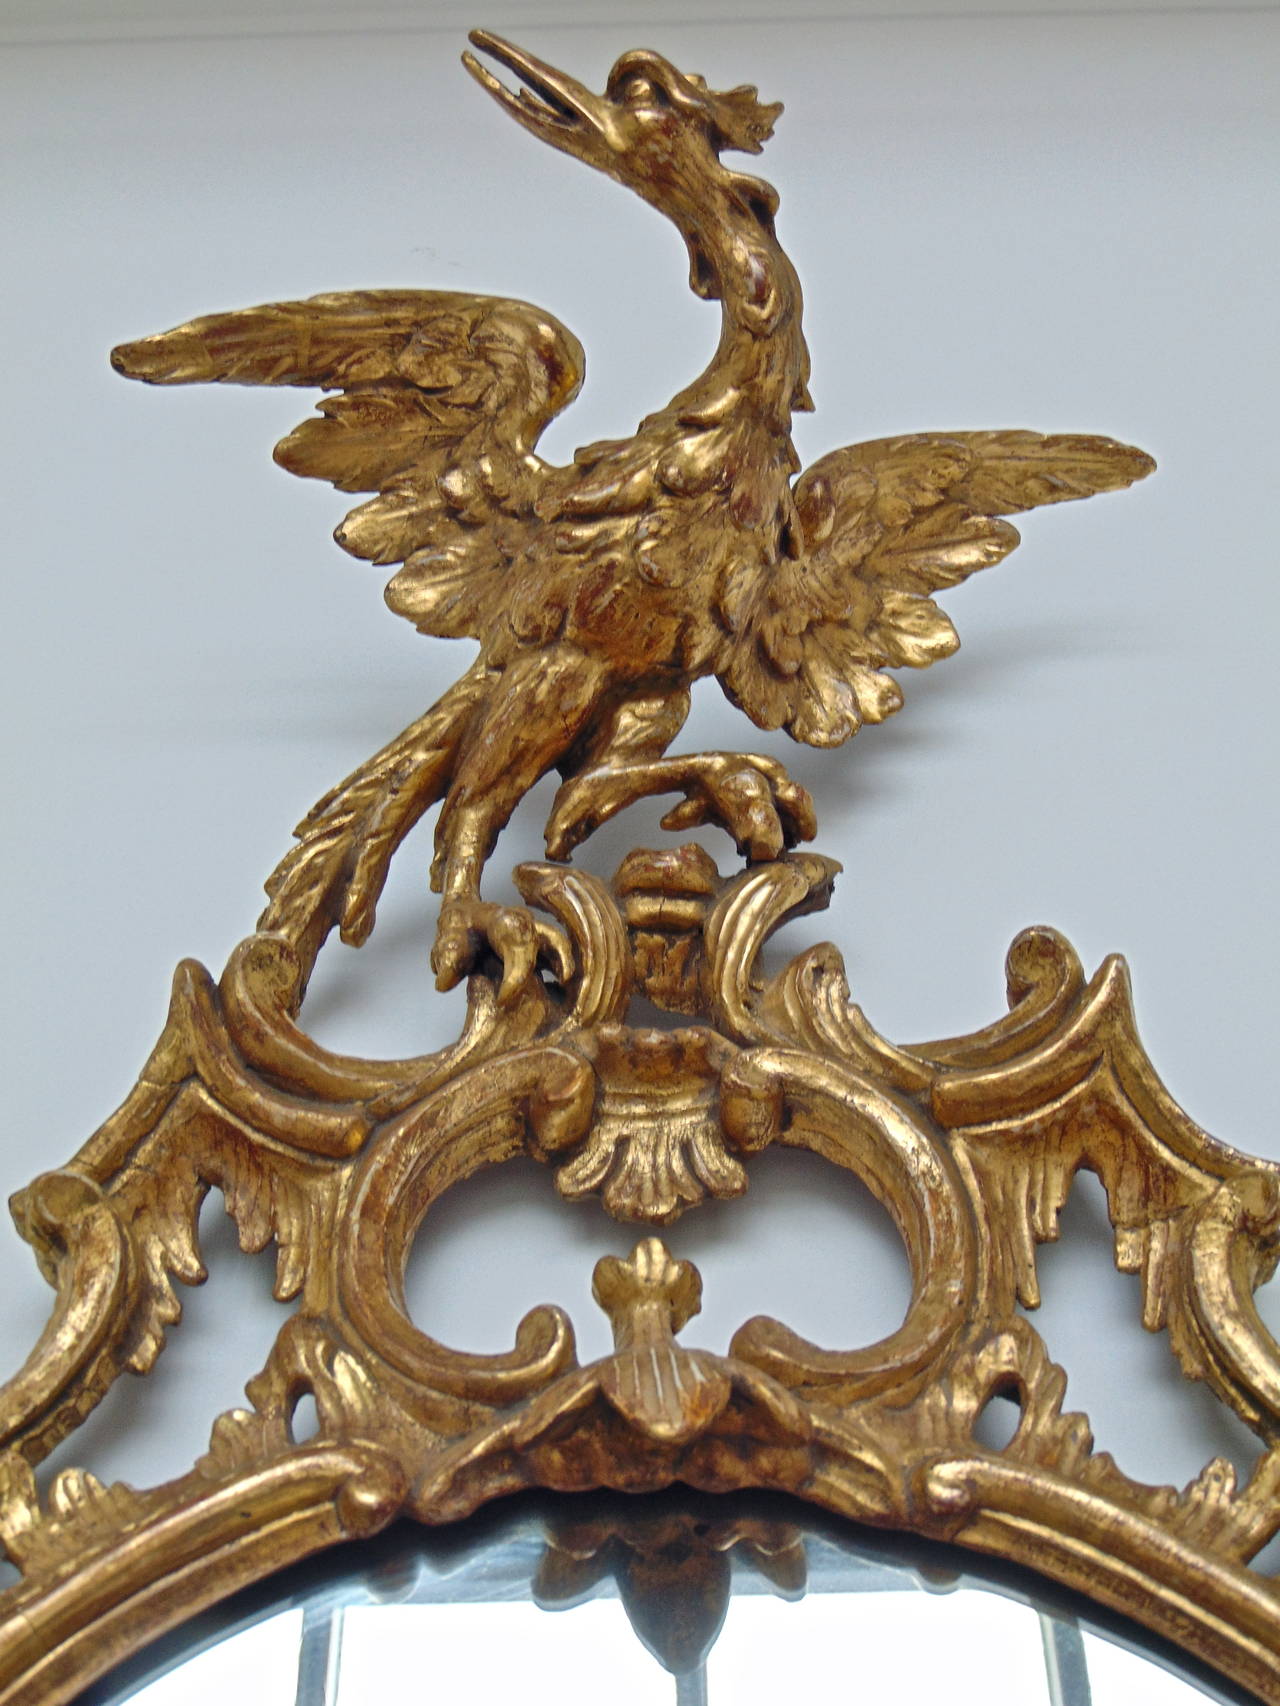 Exquisitely carved and executed giltwood oval Chippendale mirror.

--Carved foliate and rock Formations, C and S-scrolls, ho ho bird crest.
--Excellent old if not period gilding, cleaned and intact.
--Original backboards and surface.

--Most